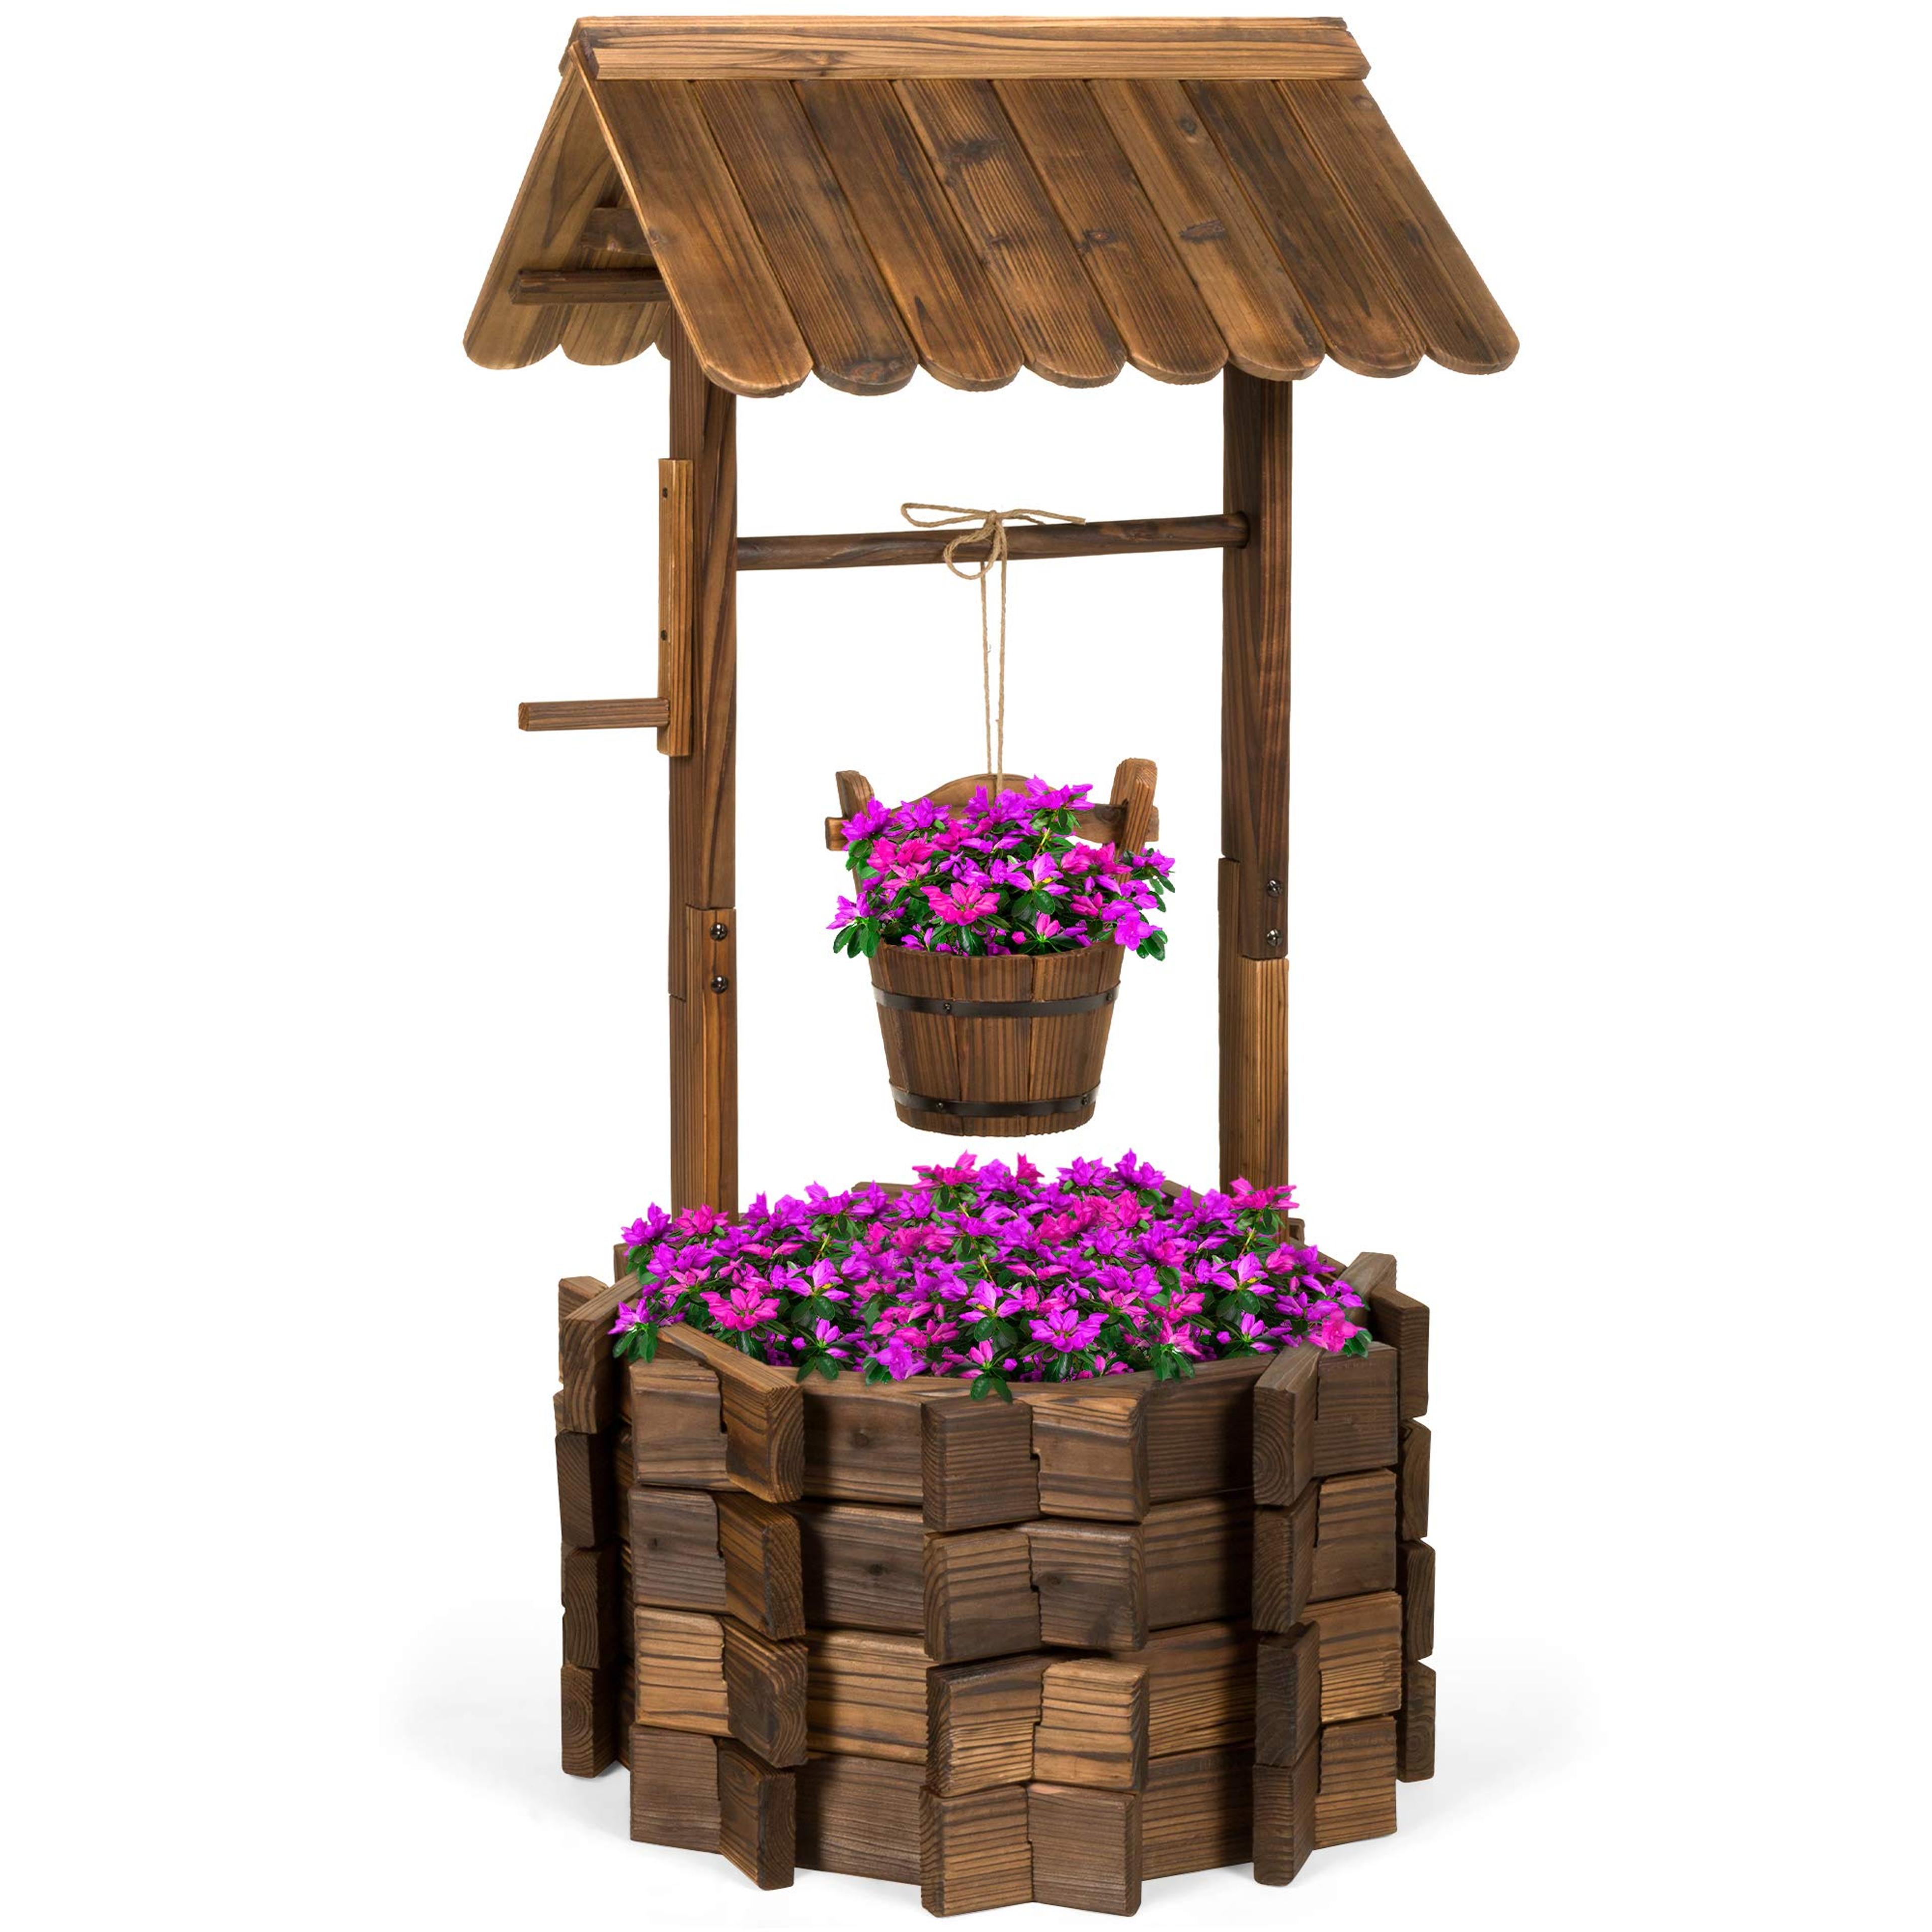 Best Choice Products Rustic Wooden Wishing Well Planter Outdoor Home Décor for Patio, Garden, Yard w/Hanging Bucket